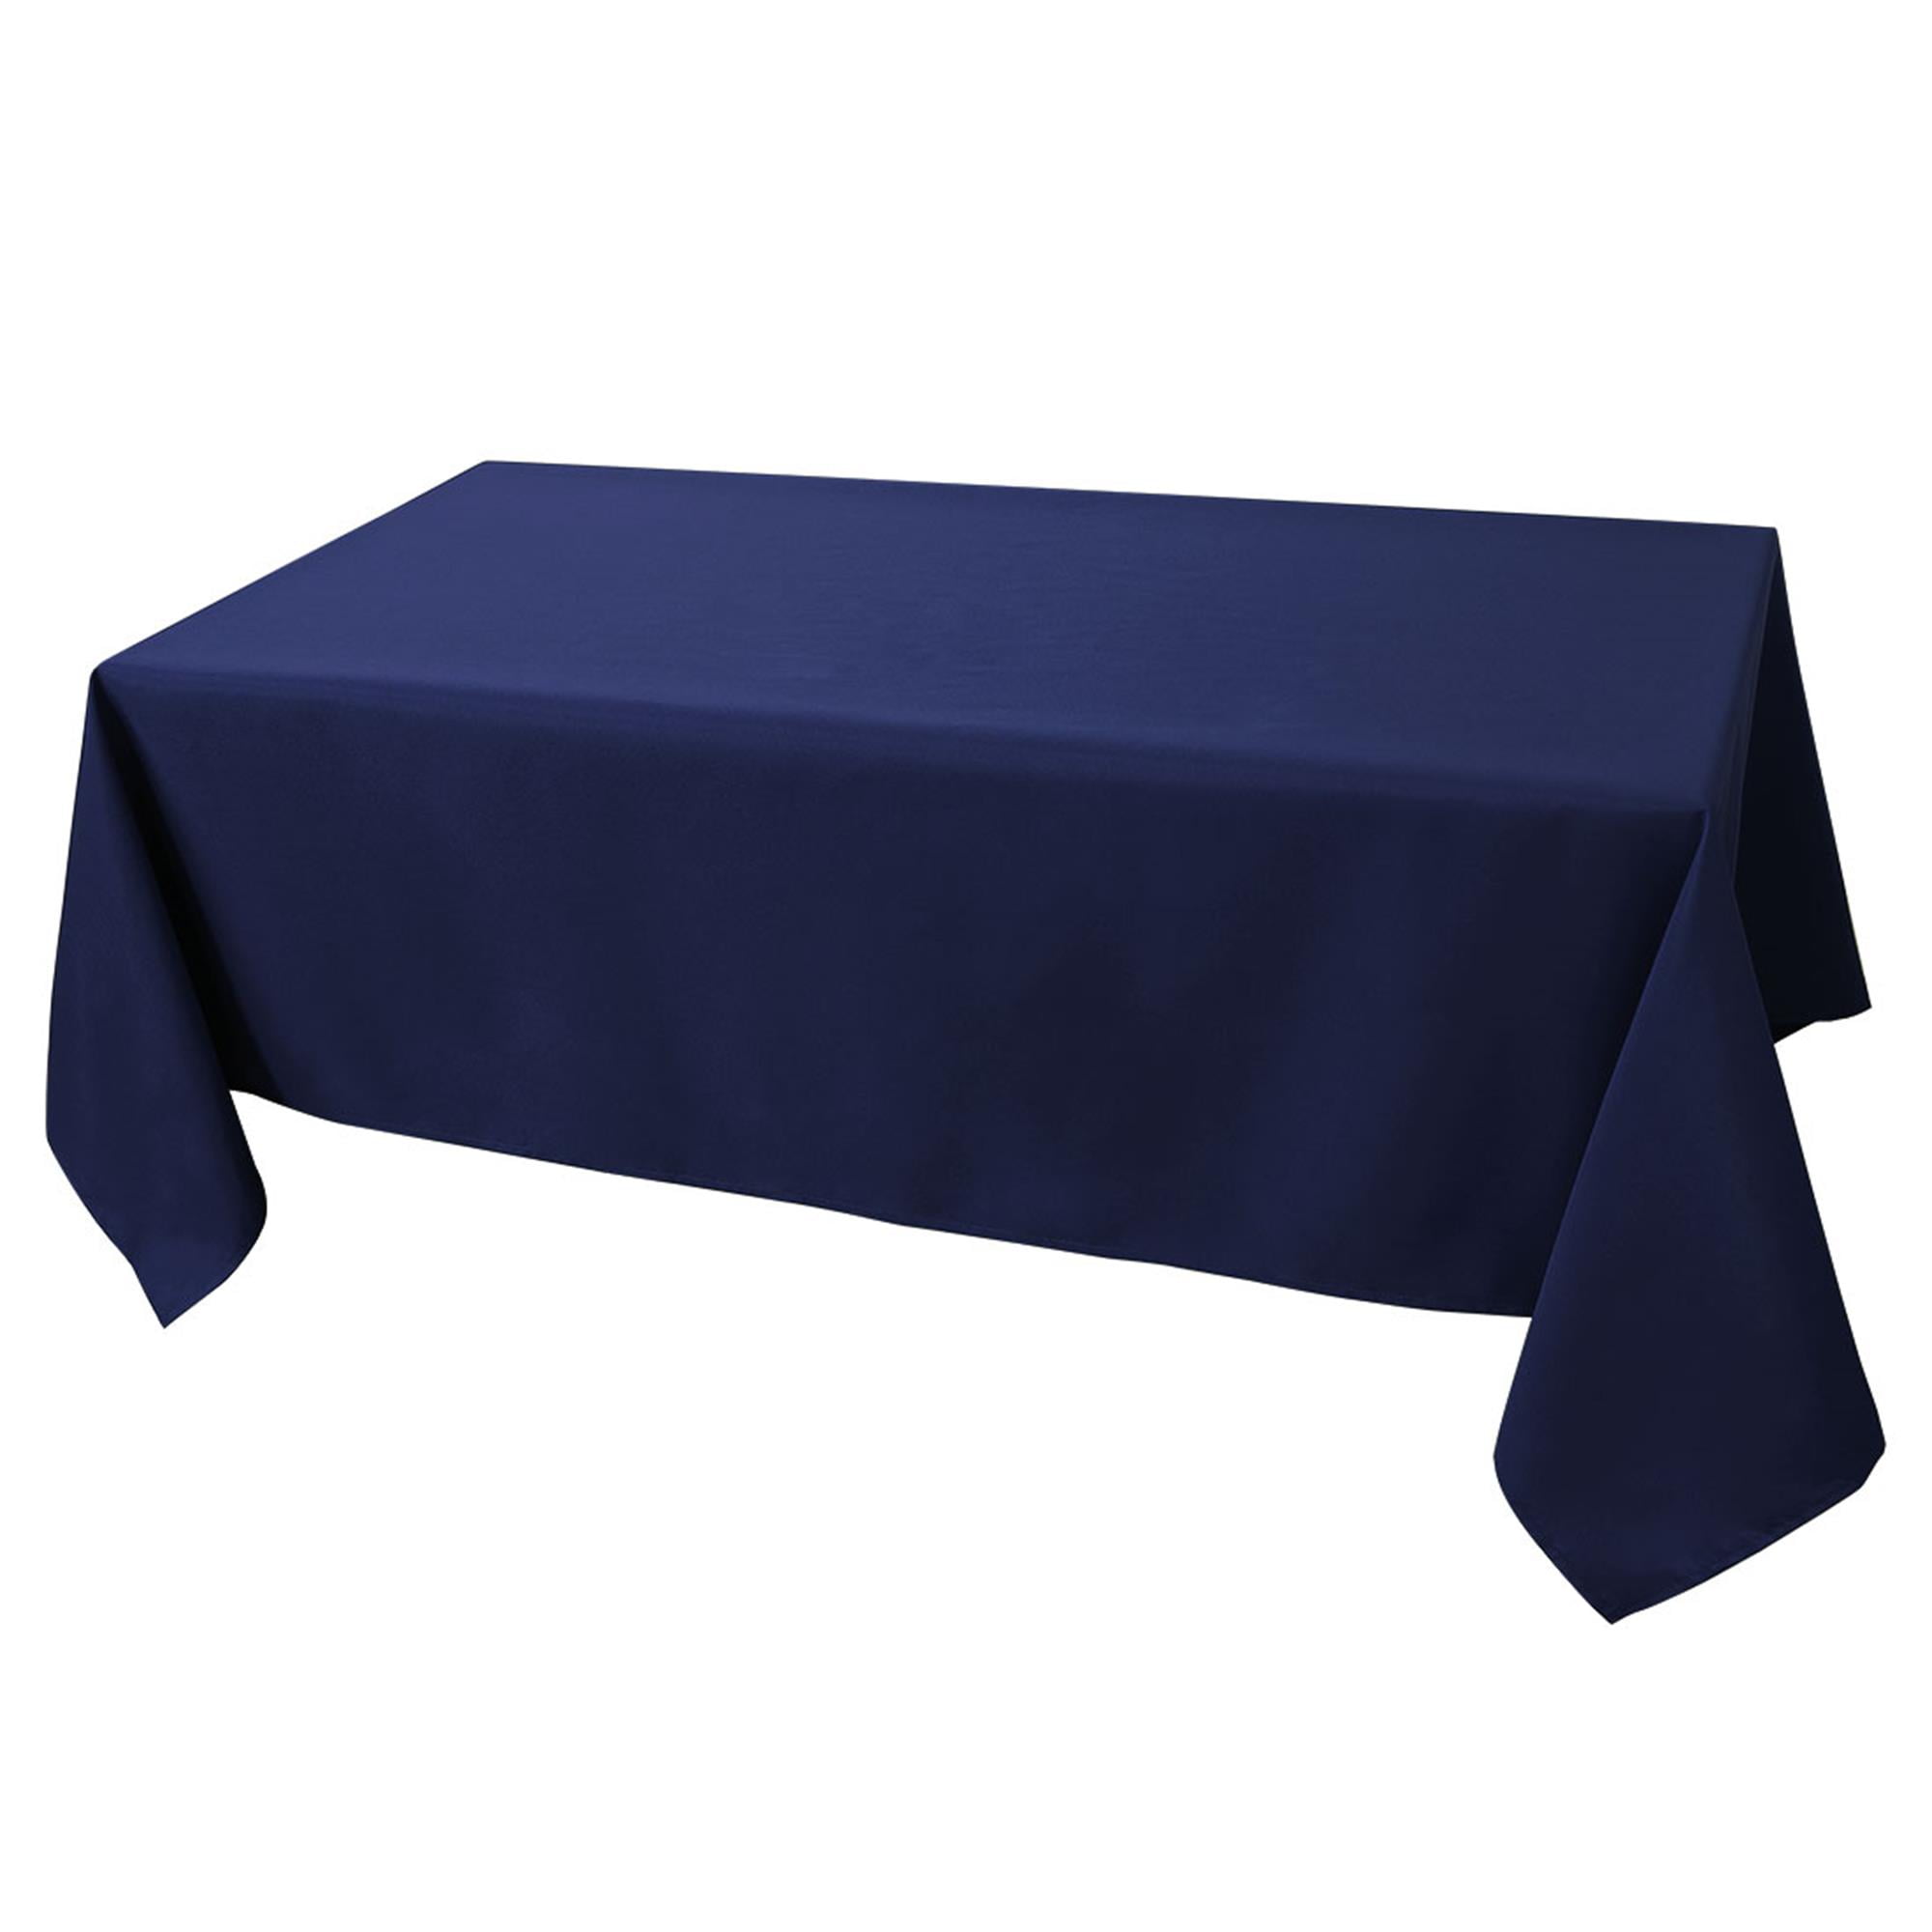 Acqua Blue By Florida Tablecloth 60 X 120 Inches Polyester Economic Line